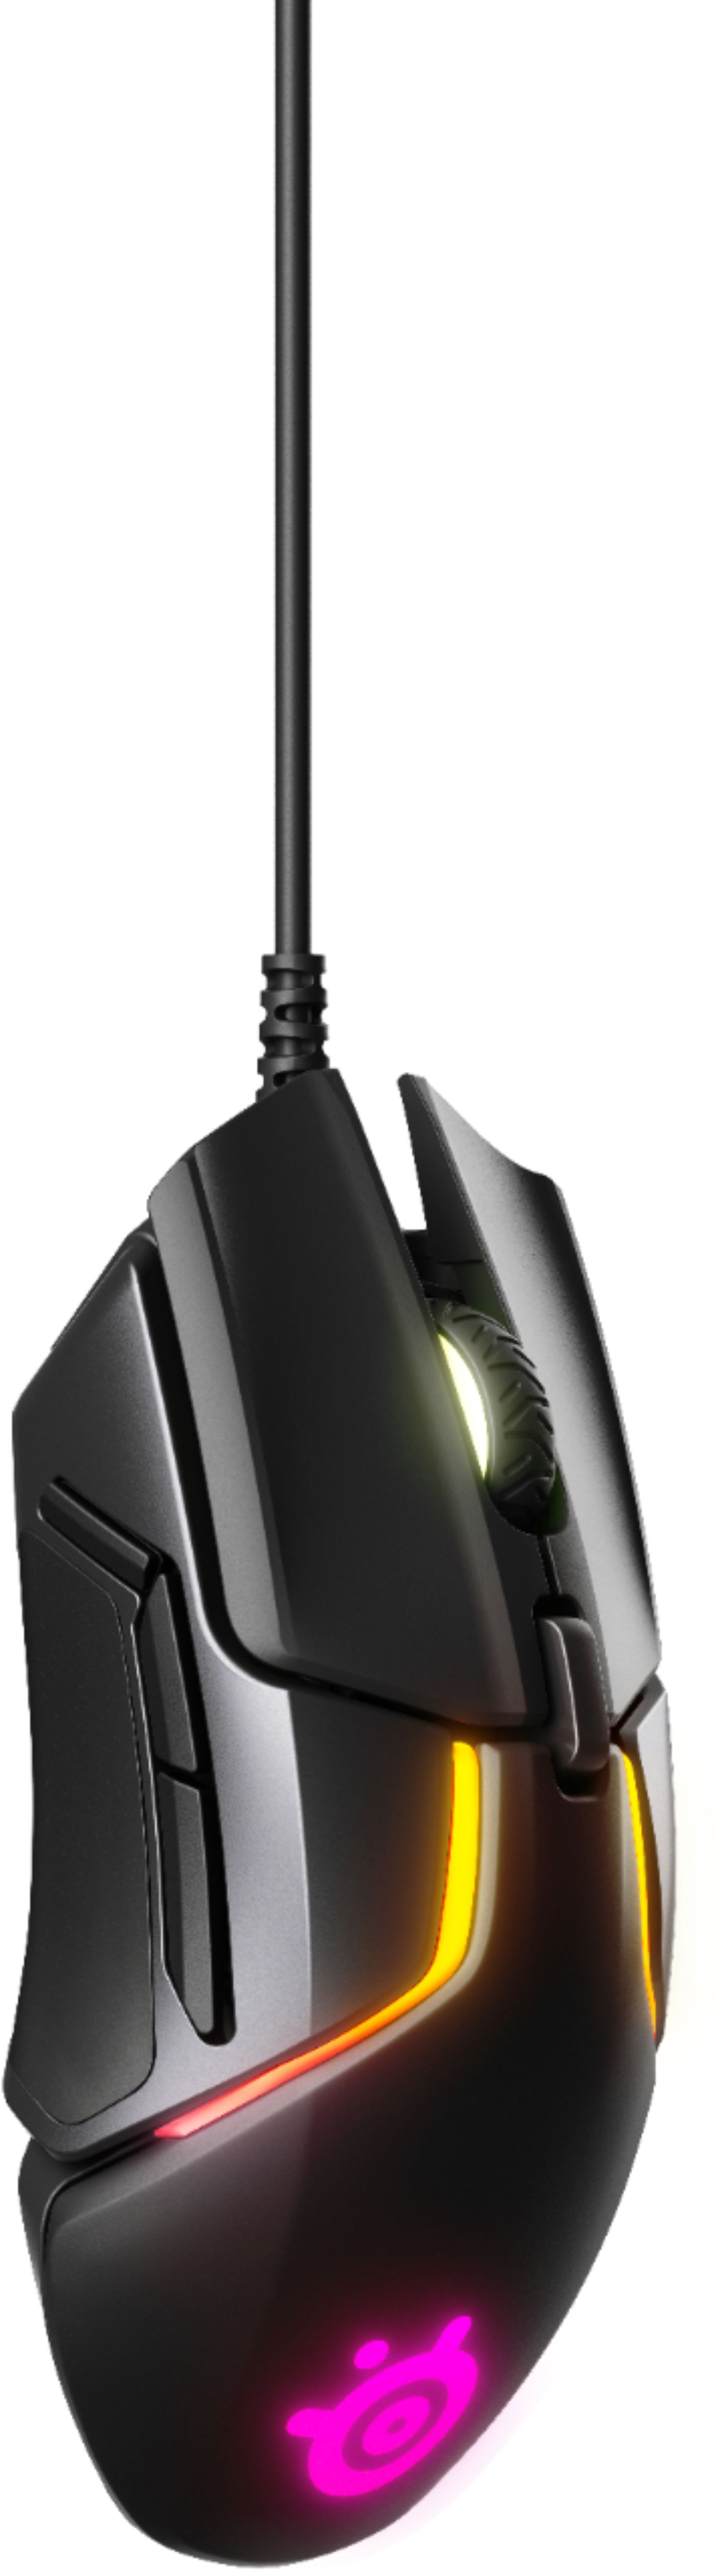 Angle View: SteelSeries - Rival 600 Wired Optical Gaming Mouse with RGB Lighting - Black